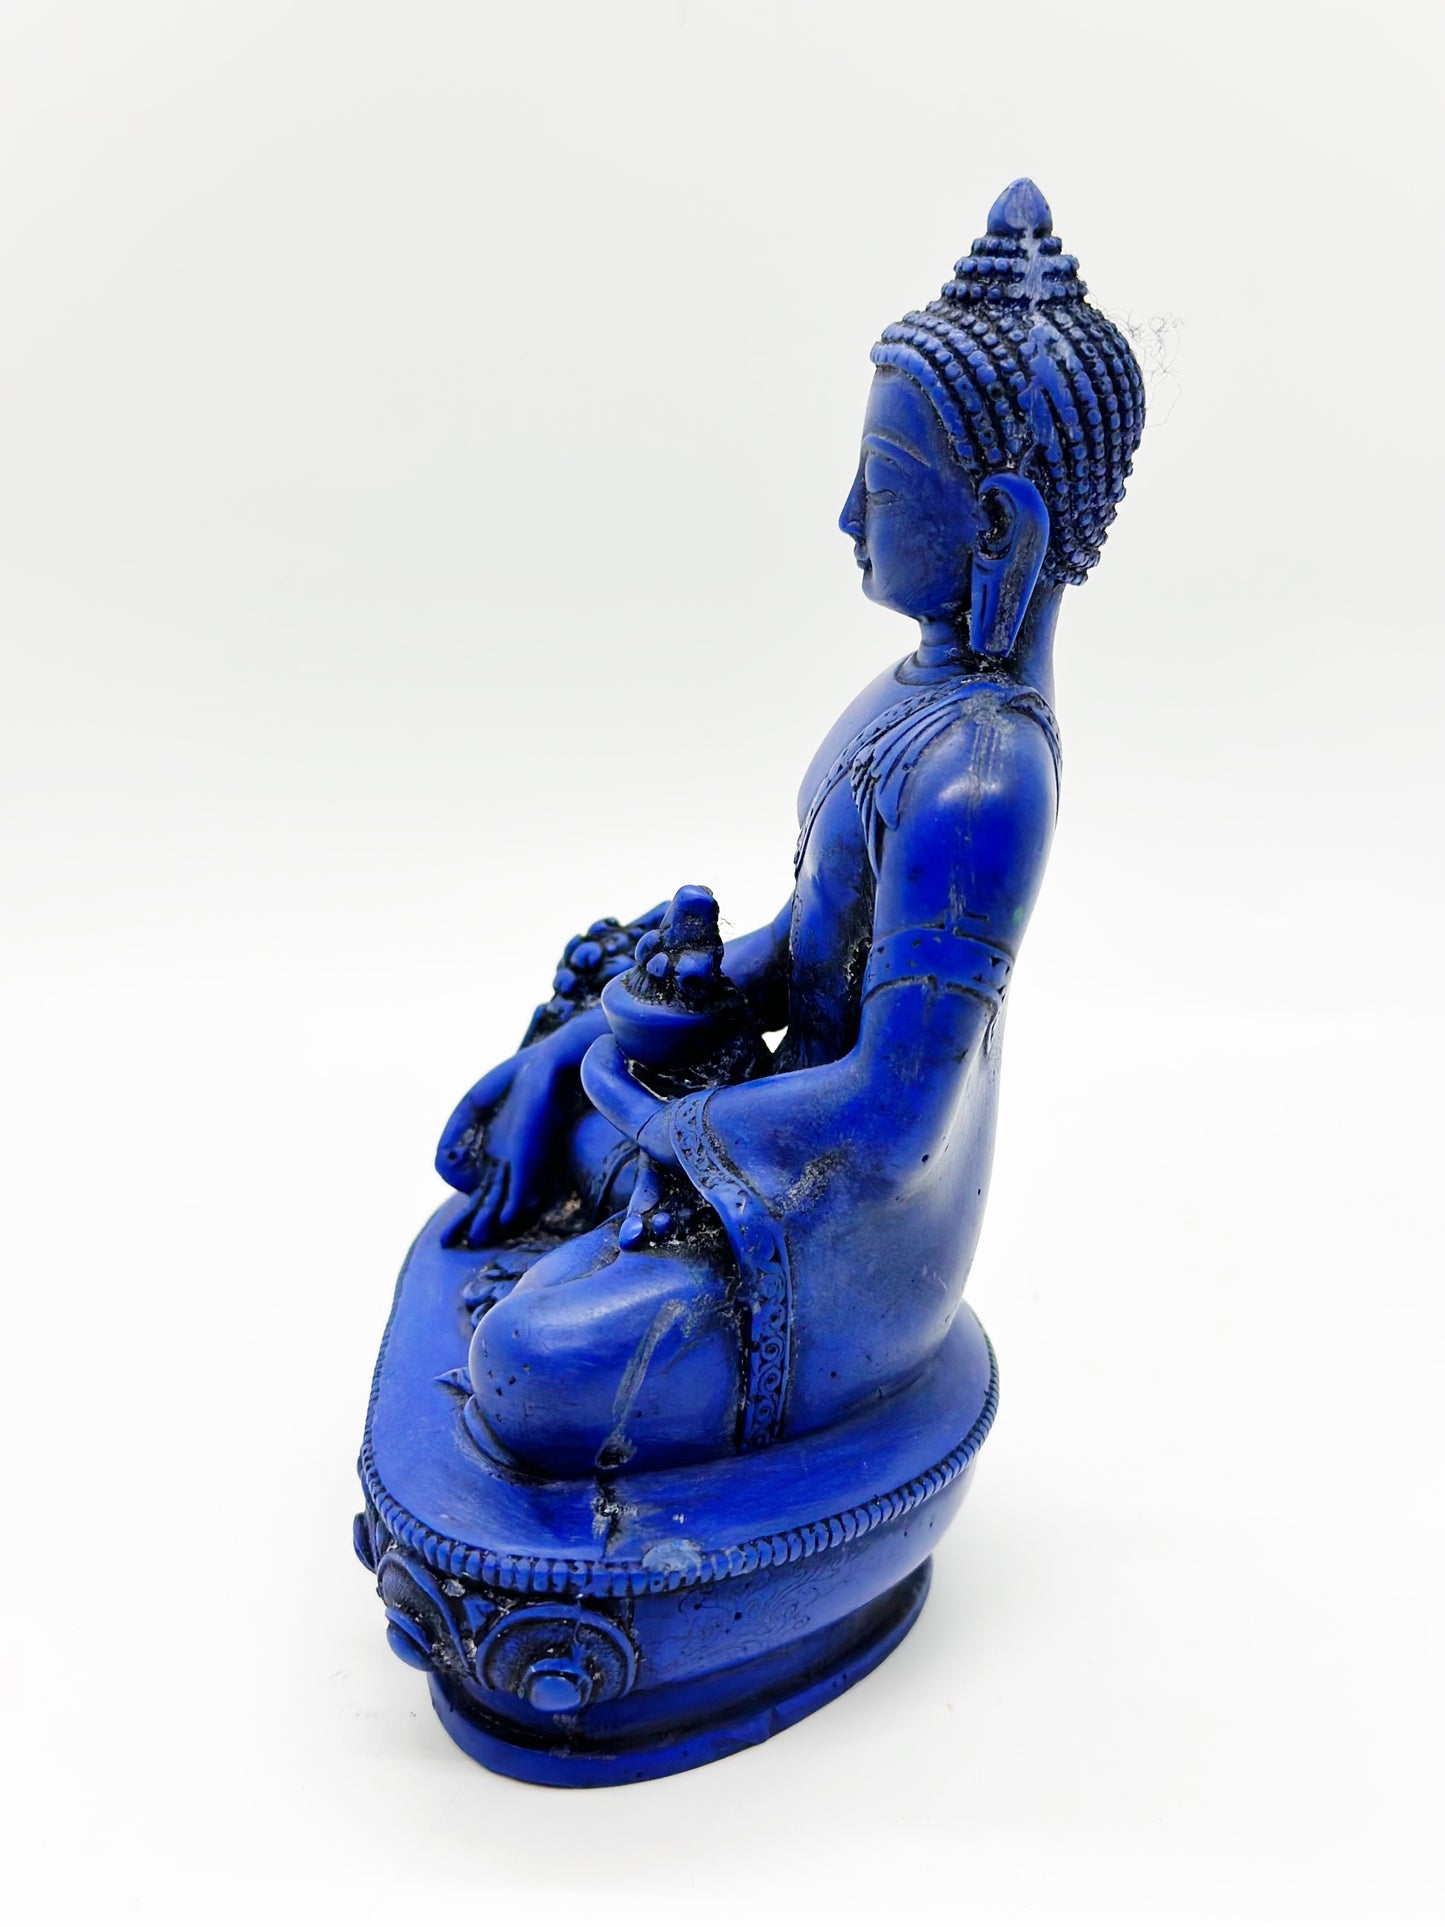 6498 -  Blue Medicine Buddha For Good Health - 5 1/4 Inches Height